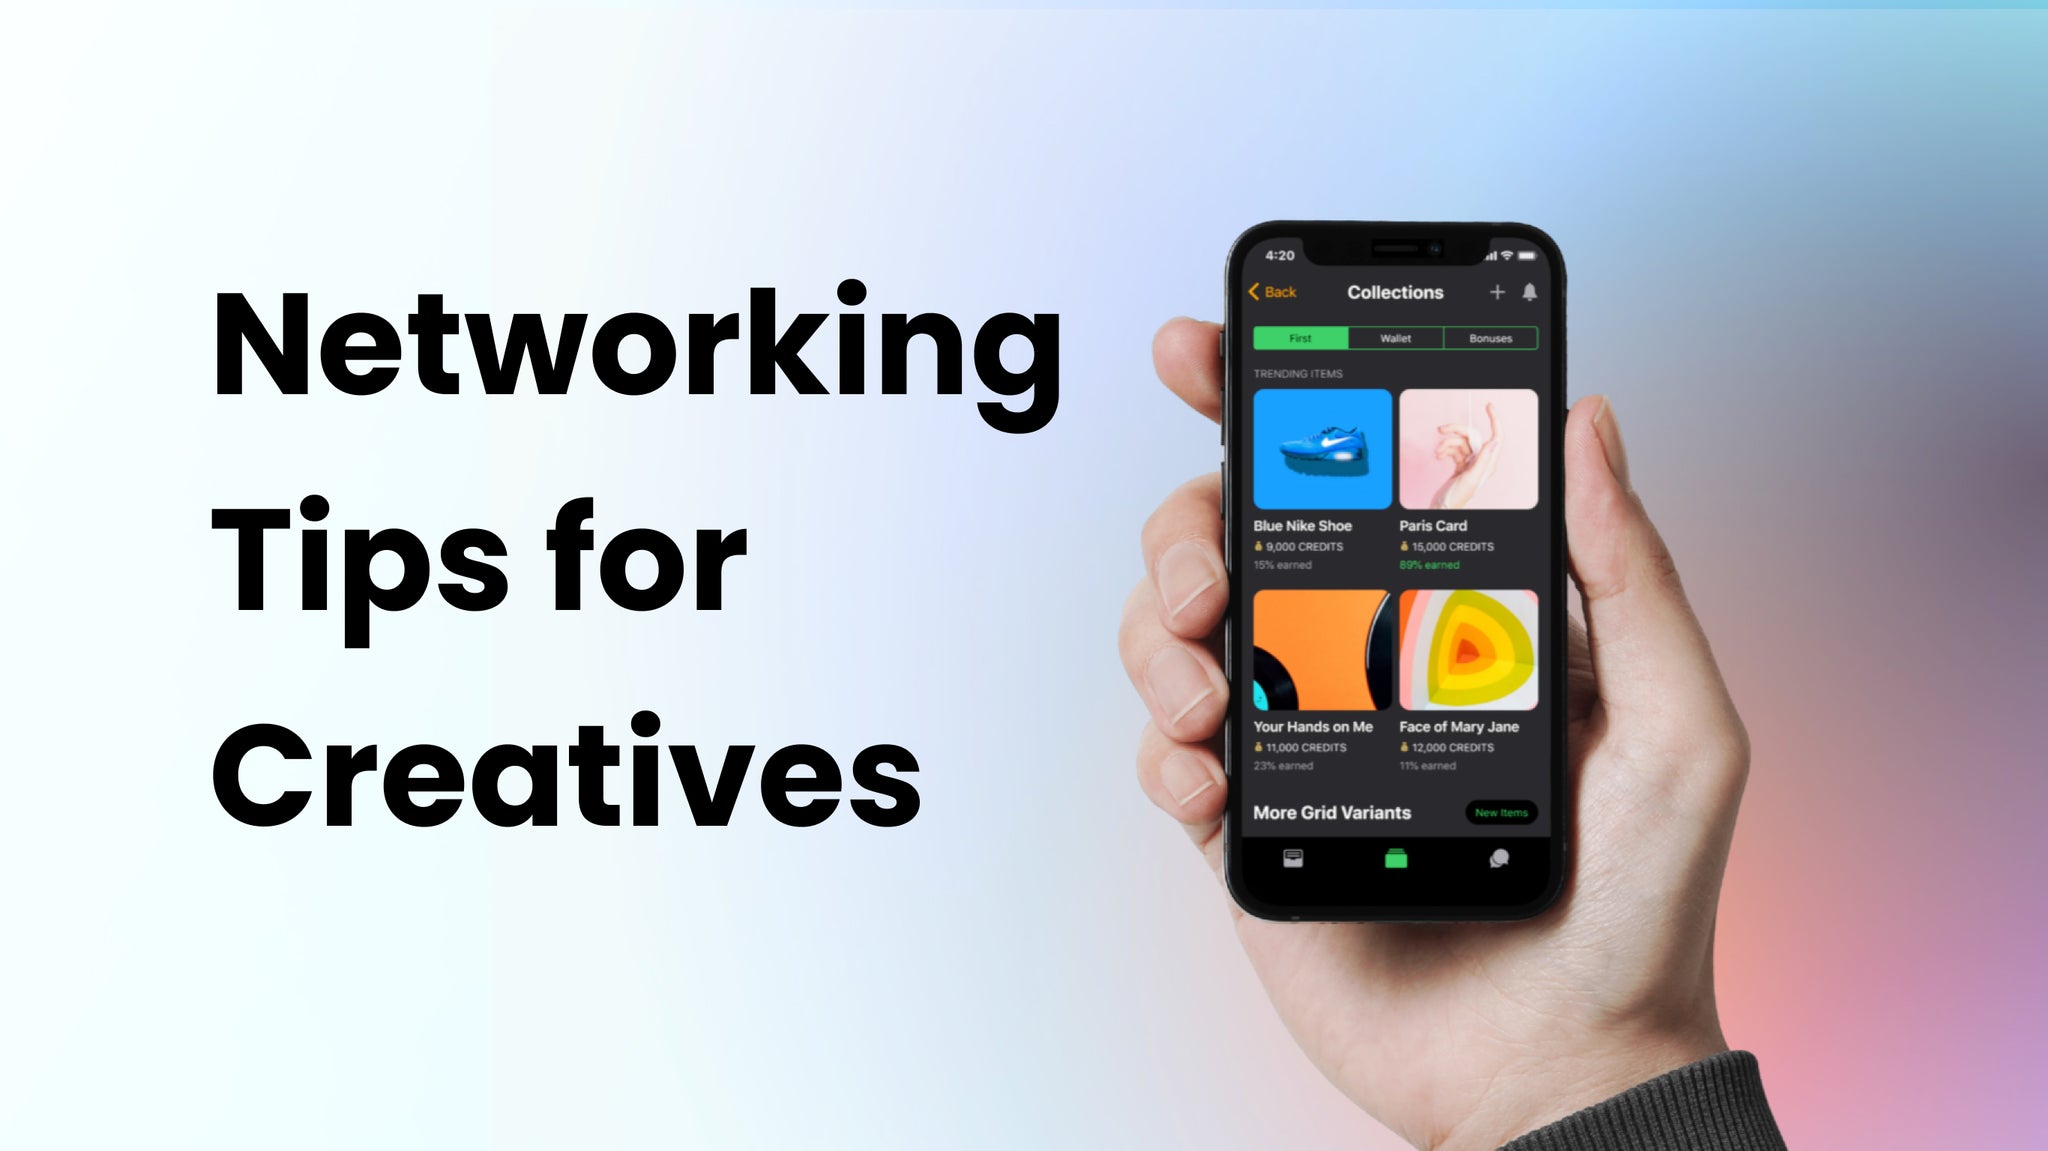 Networking Tips for Creatives